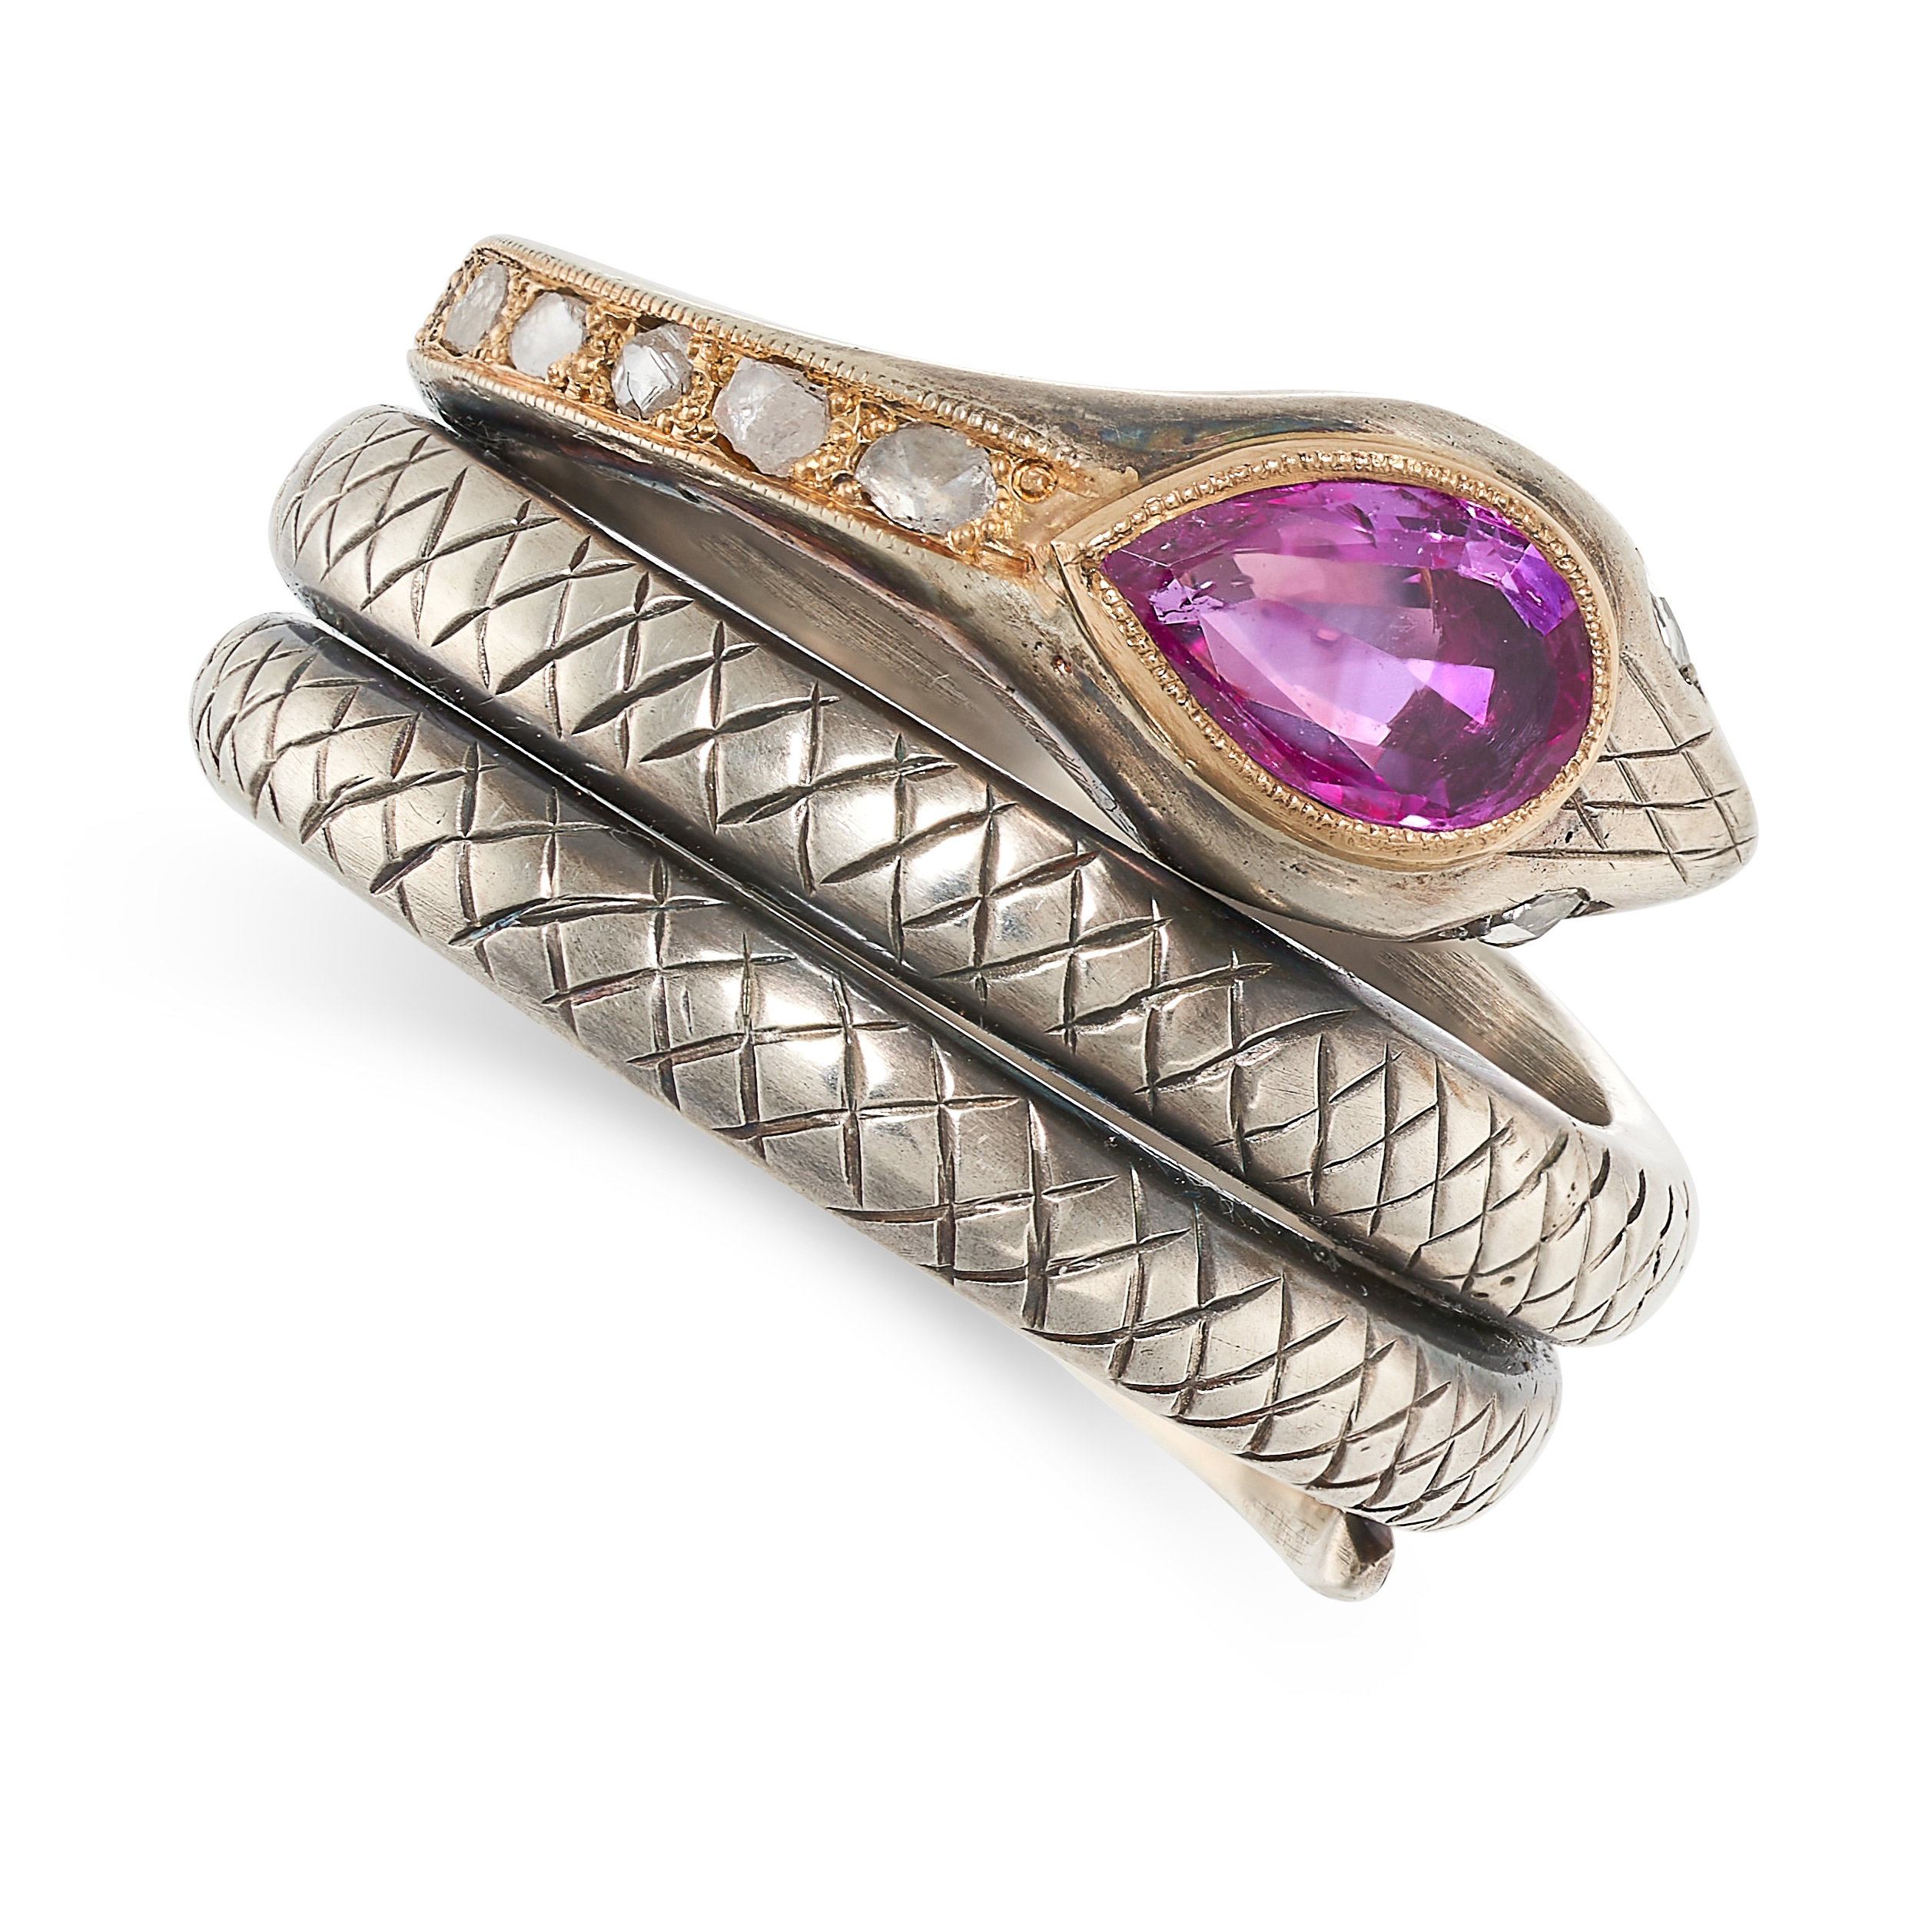 A PINK SAPPHIRE AND DIAMOND SNAKE RING set to the head with a pear shape pink sapphire of 0.97